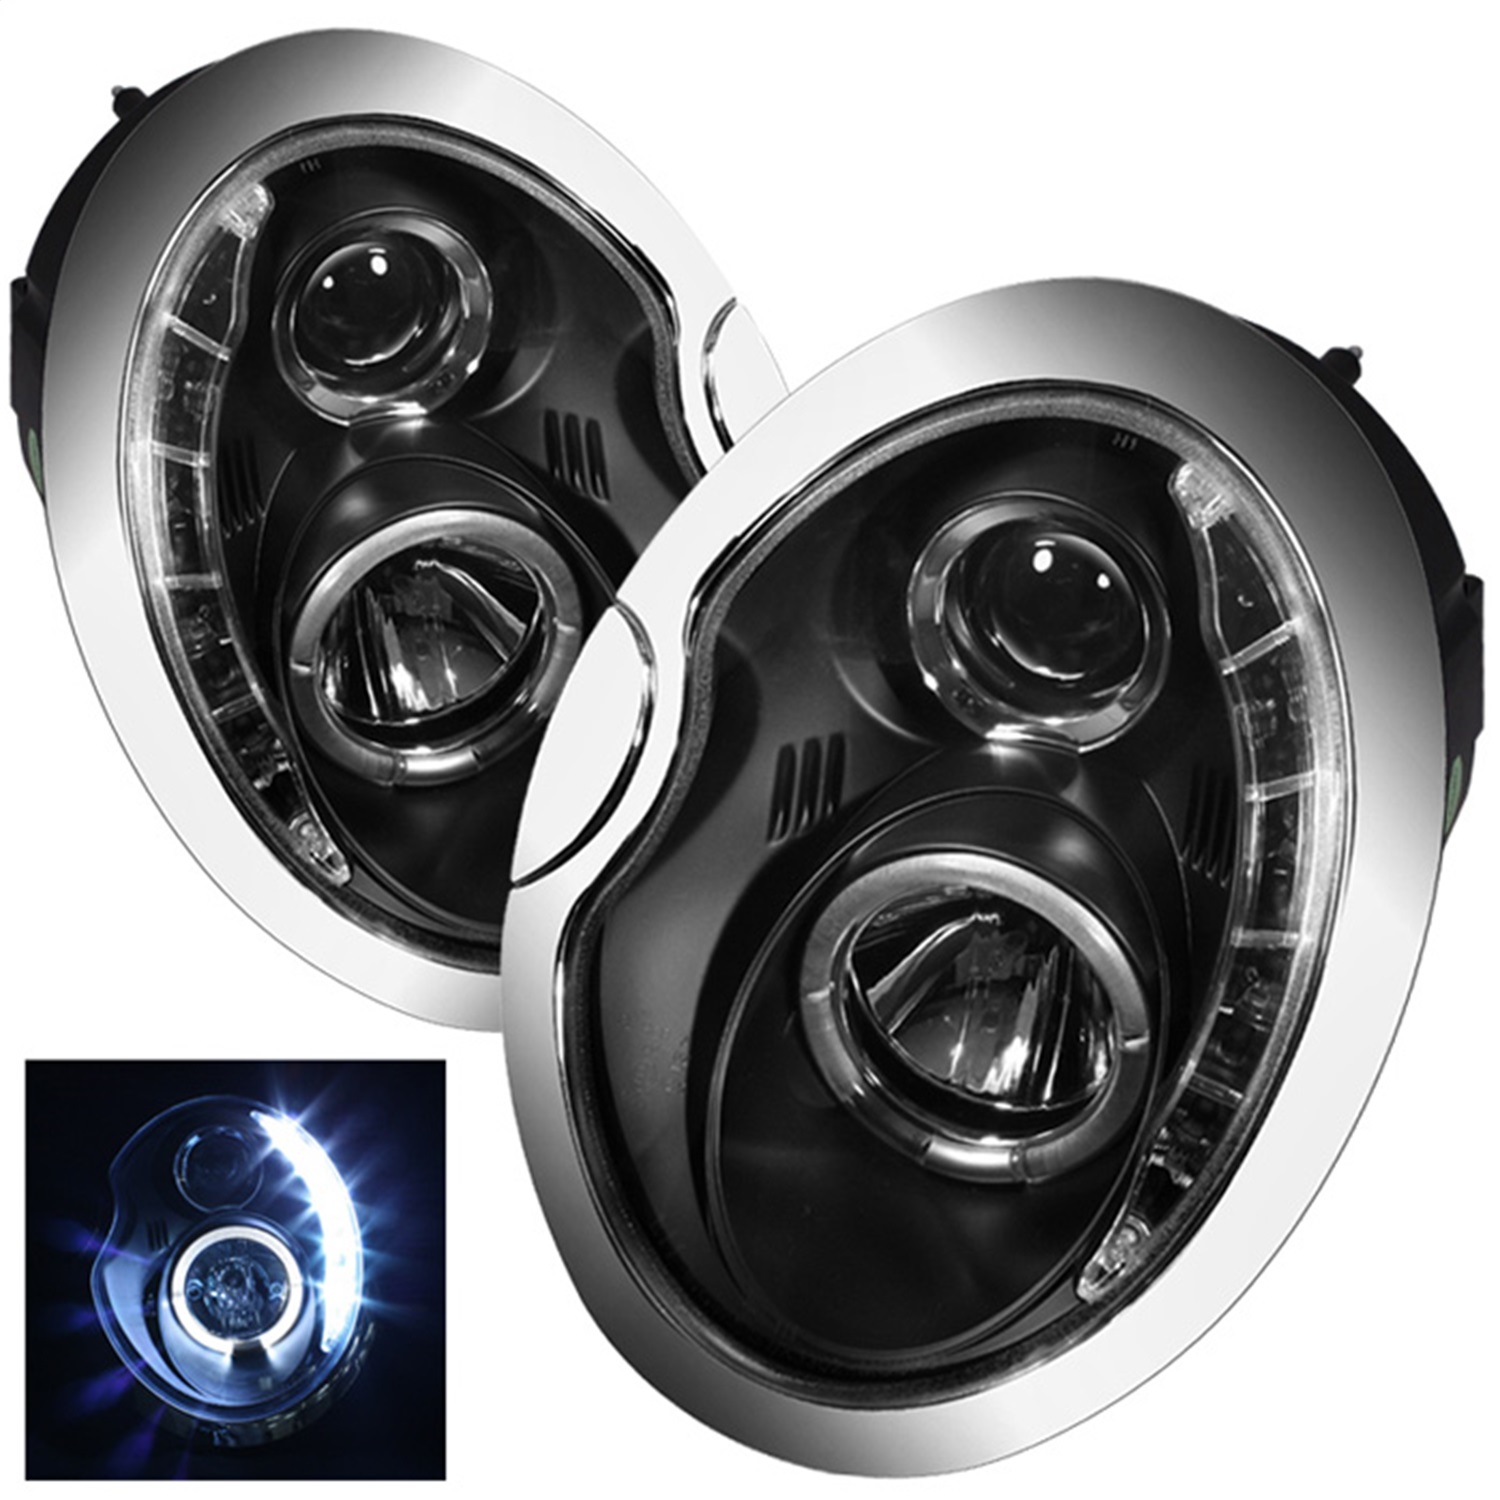 Spyder Auto 5011336 DRL LED Projector Headlights Fits 02-06 Cooper